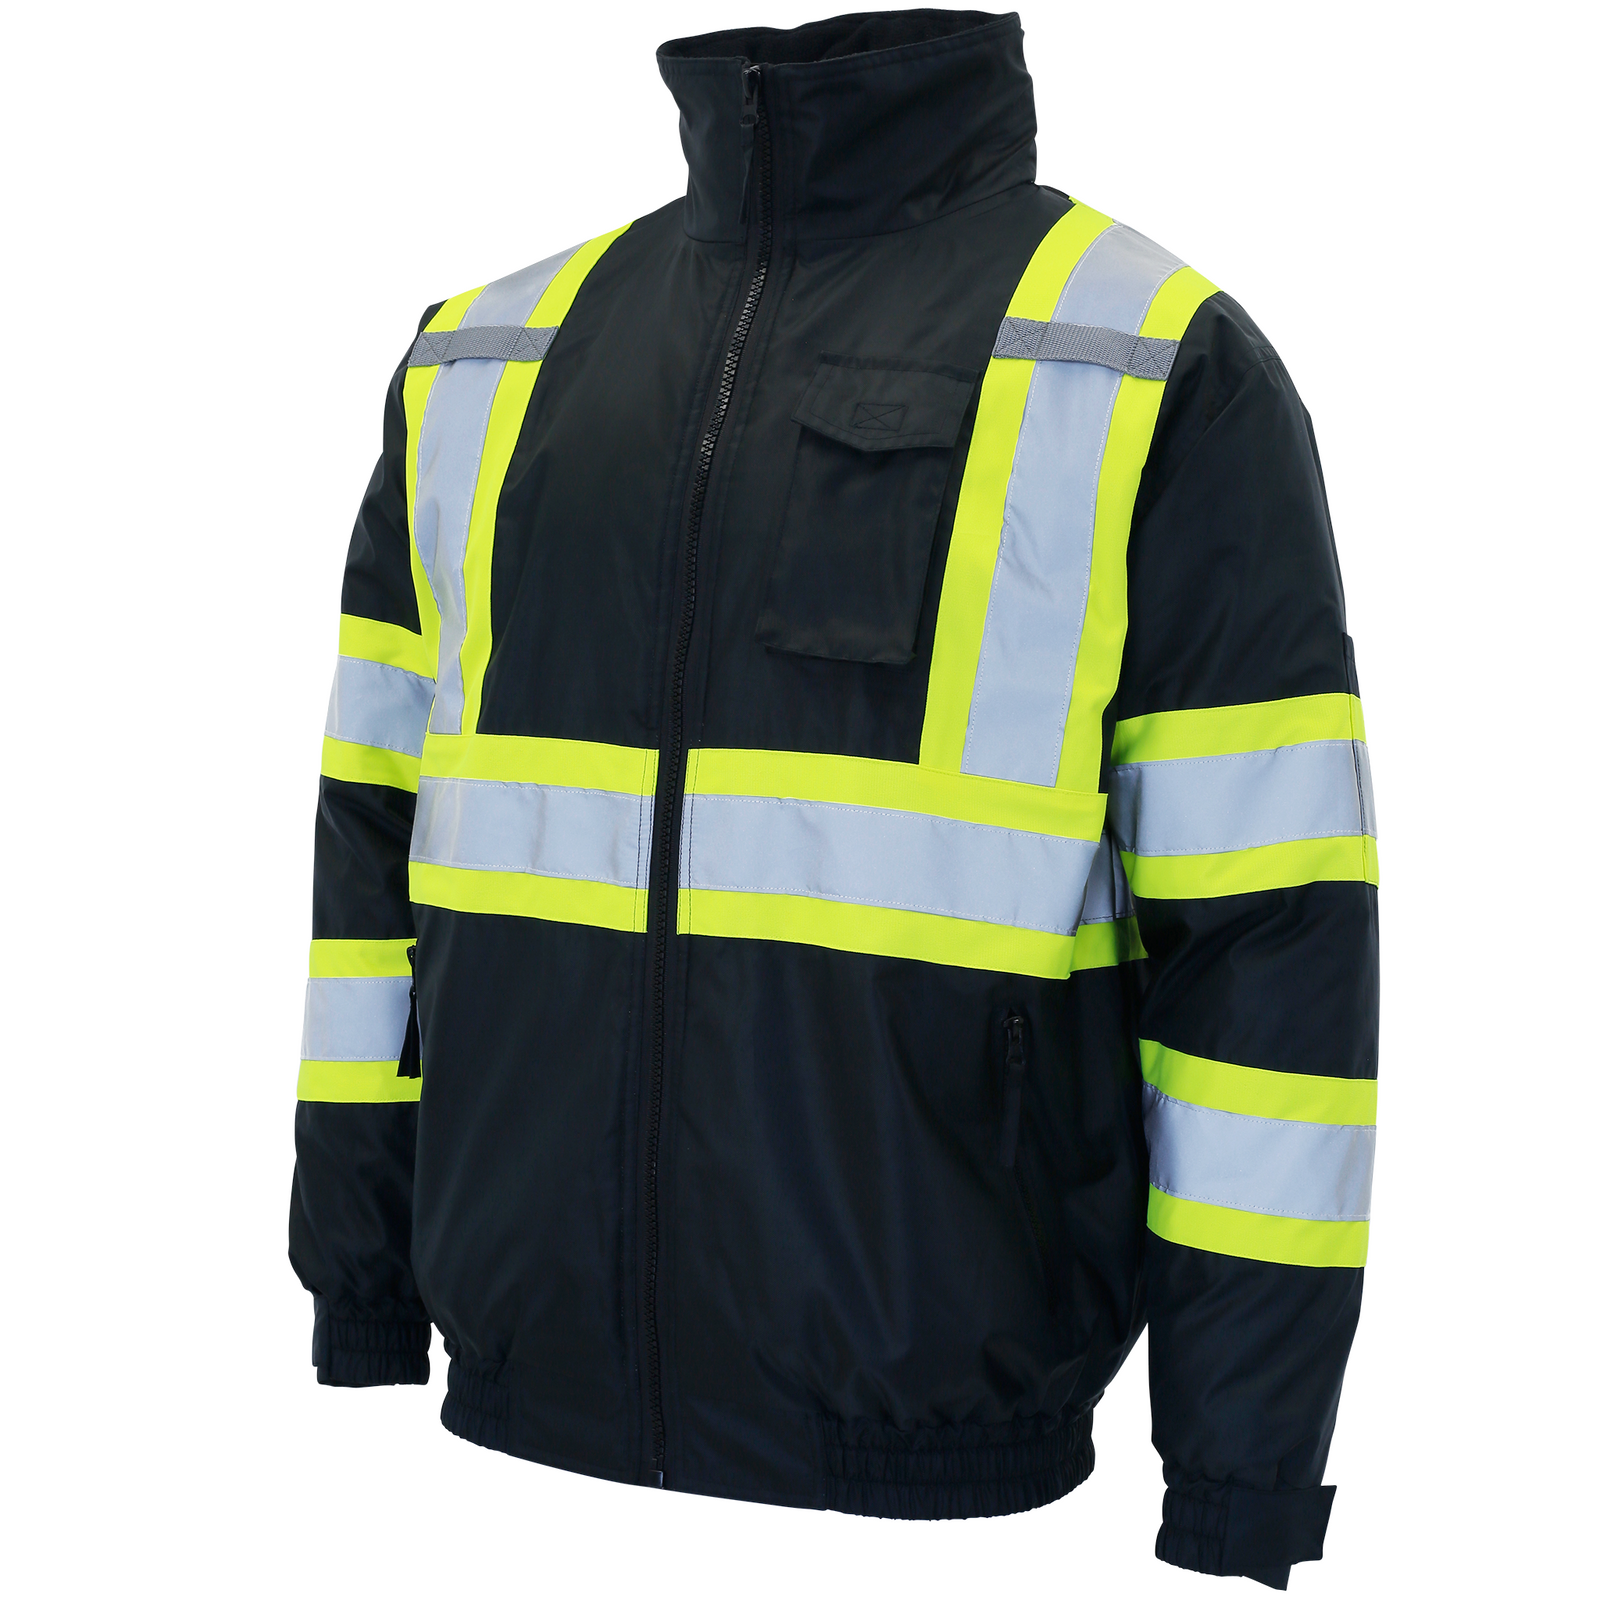 Diagonal view of the back and yellow/lime JORESTECH Hi-vis two tone safety bomber jacket with reflective and contrasting yellow stripes